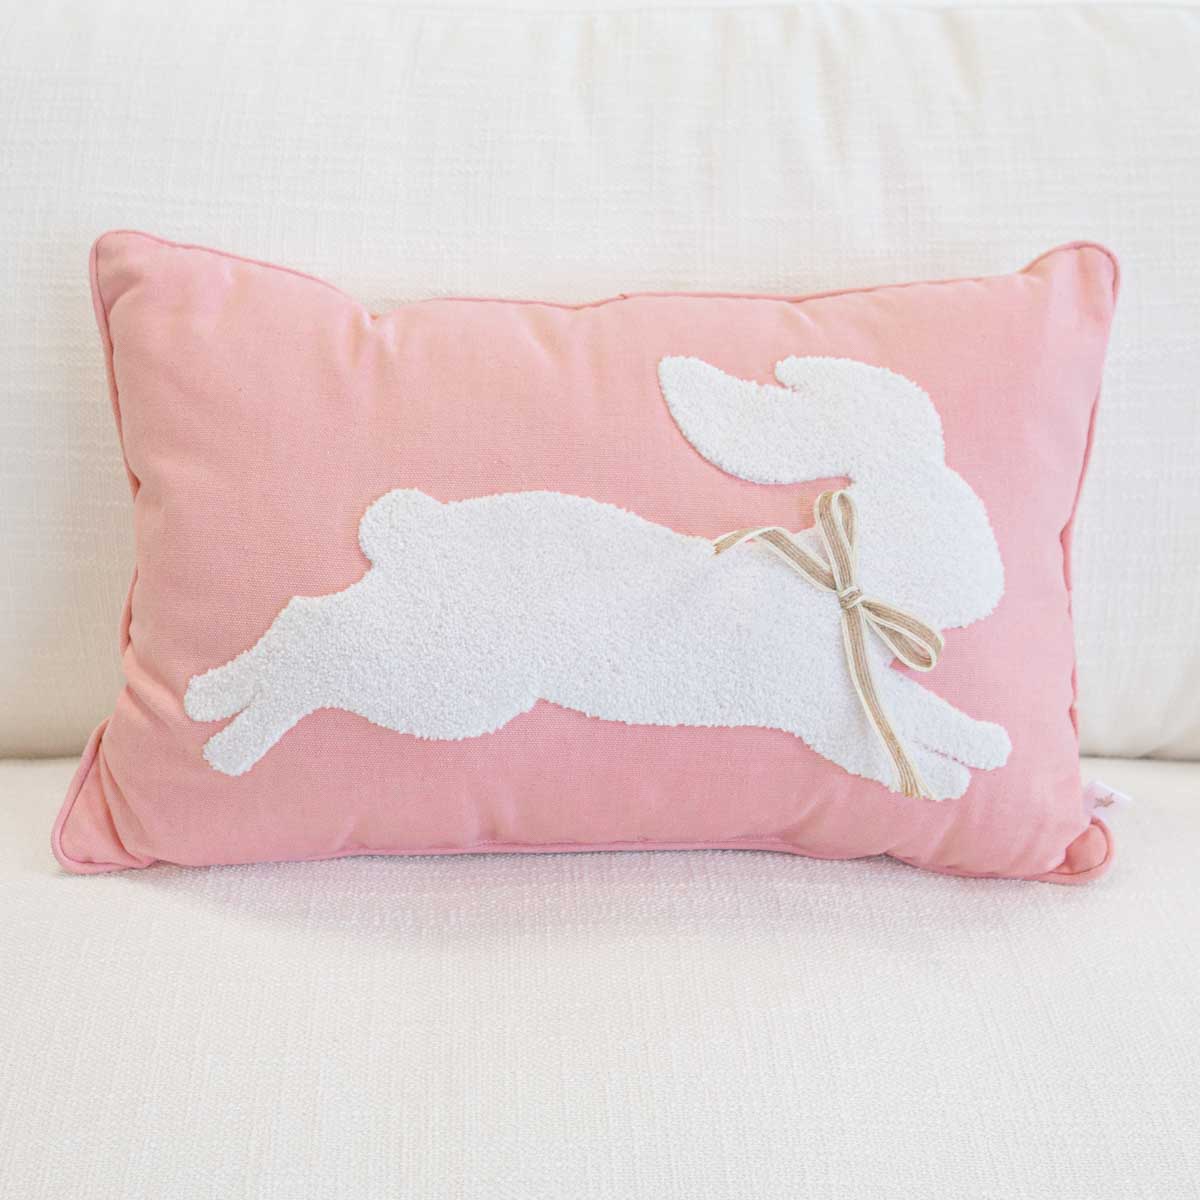 Leaping Bunny Embroidered Lumbar Pillow in Light Pink/White